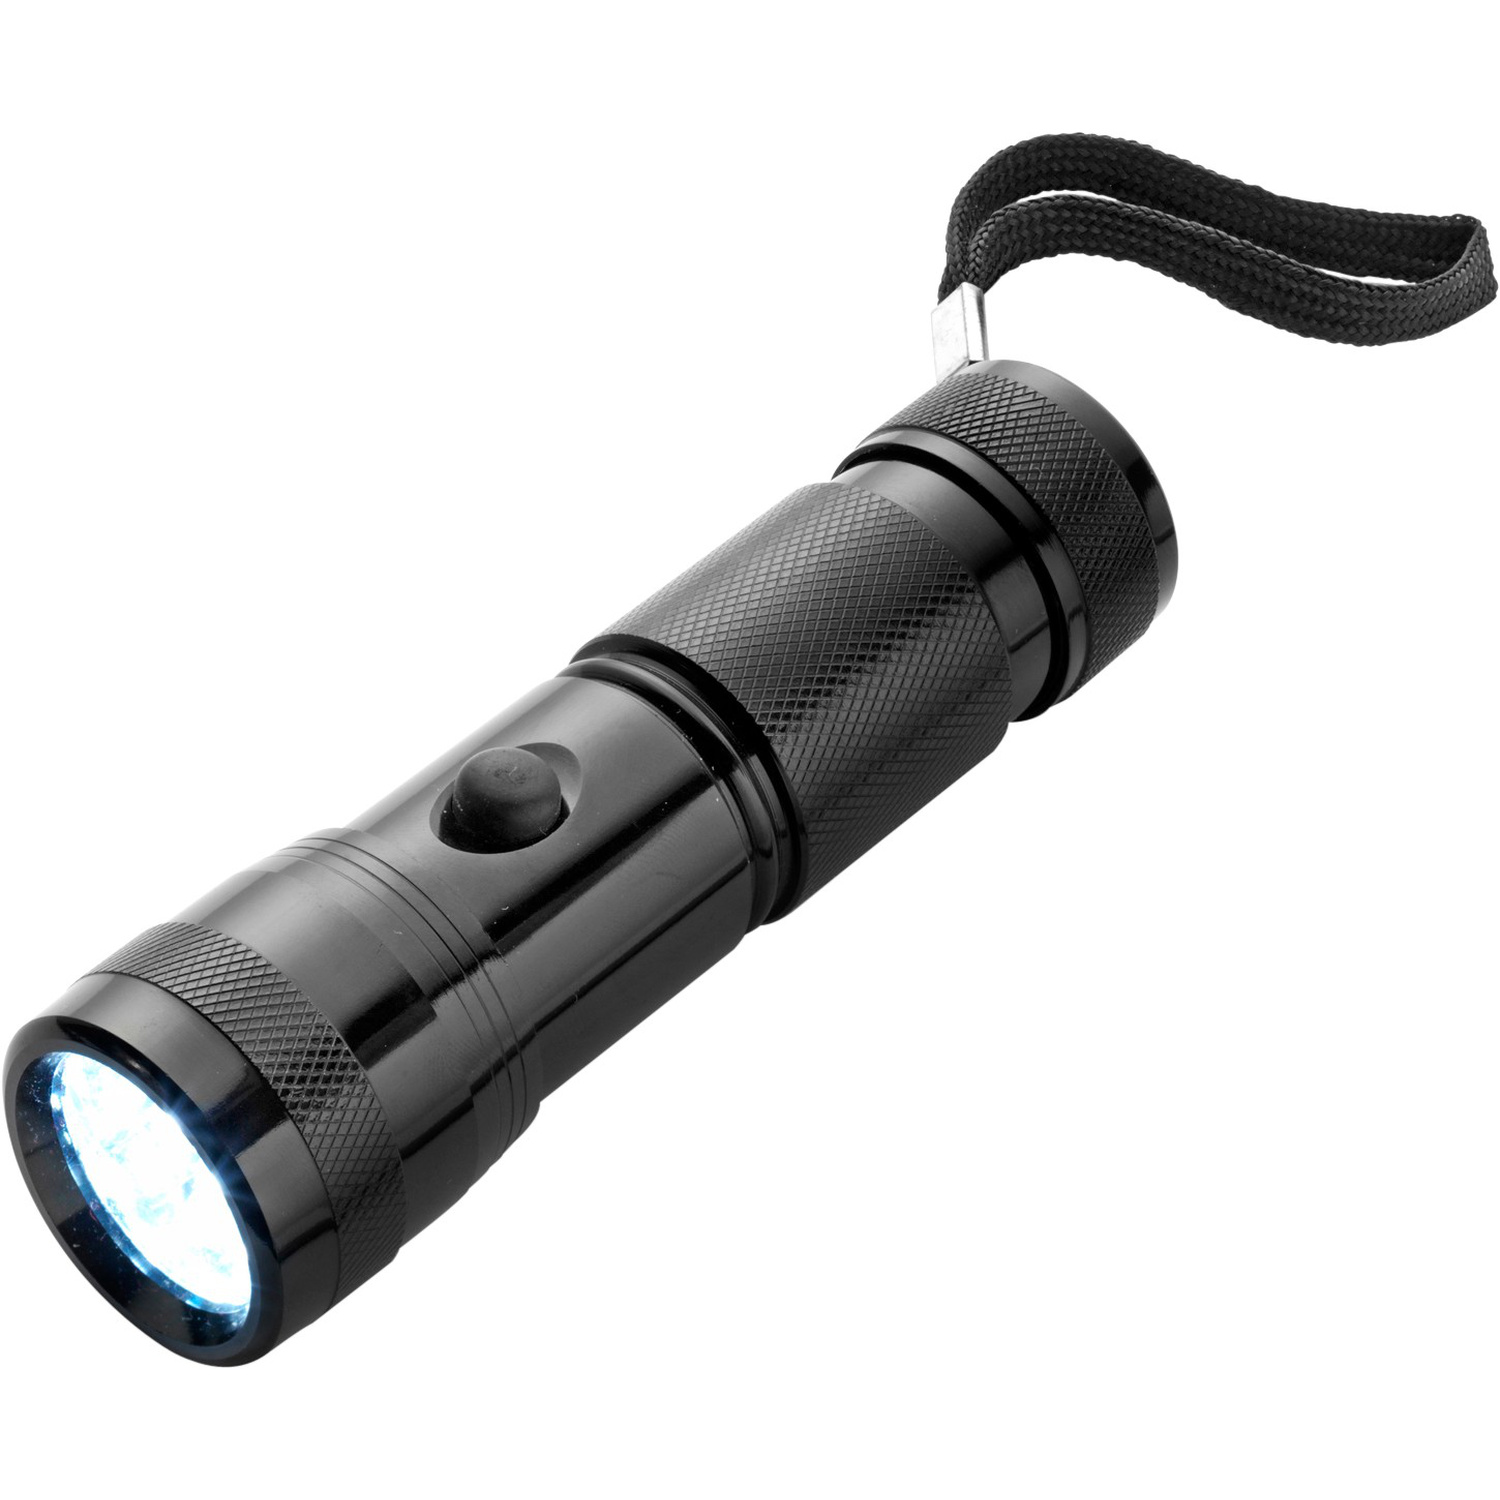 004837 001999999 3d045 rgt pro01 fal - Torch with 14 LED lights